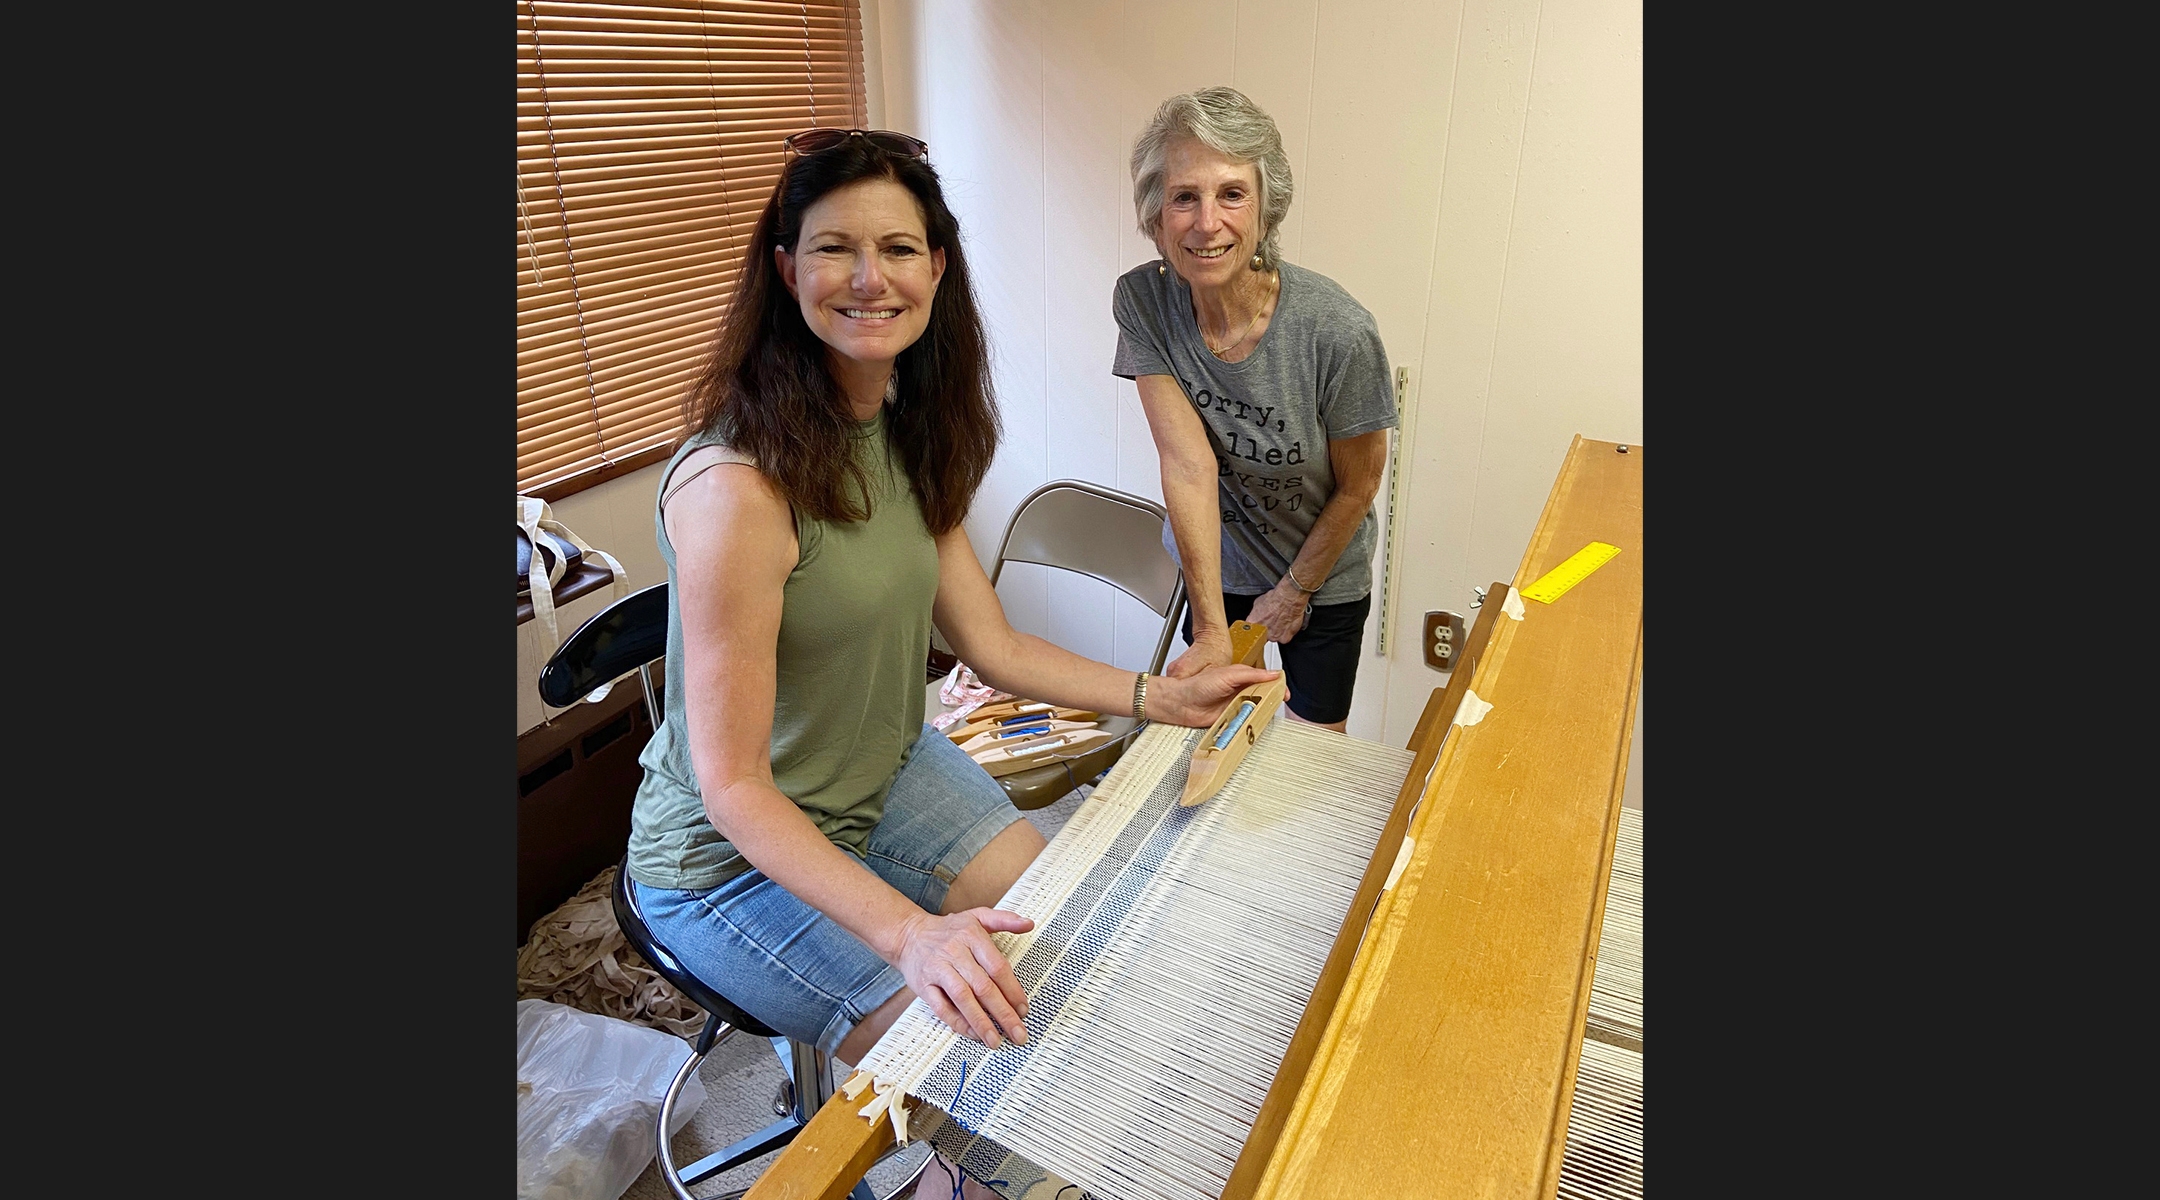 Jennifer Bullock and Cory Schneider weave on the newly-renovated loom that was donated by Deborah Lamensdorf Berman. (Congregation Neve Shalom)